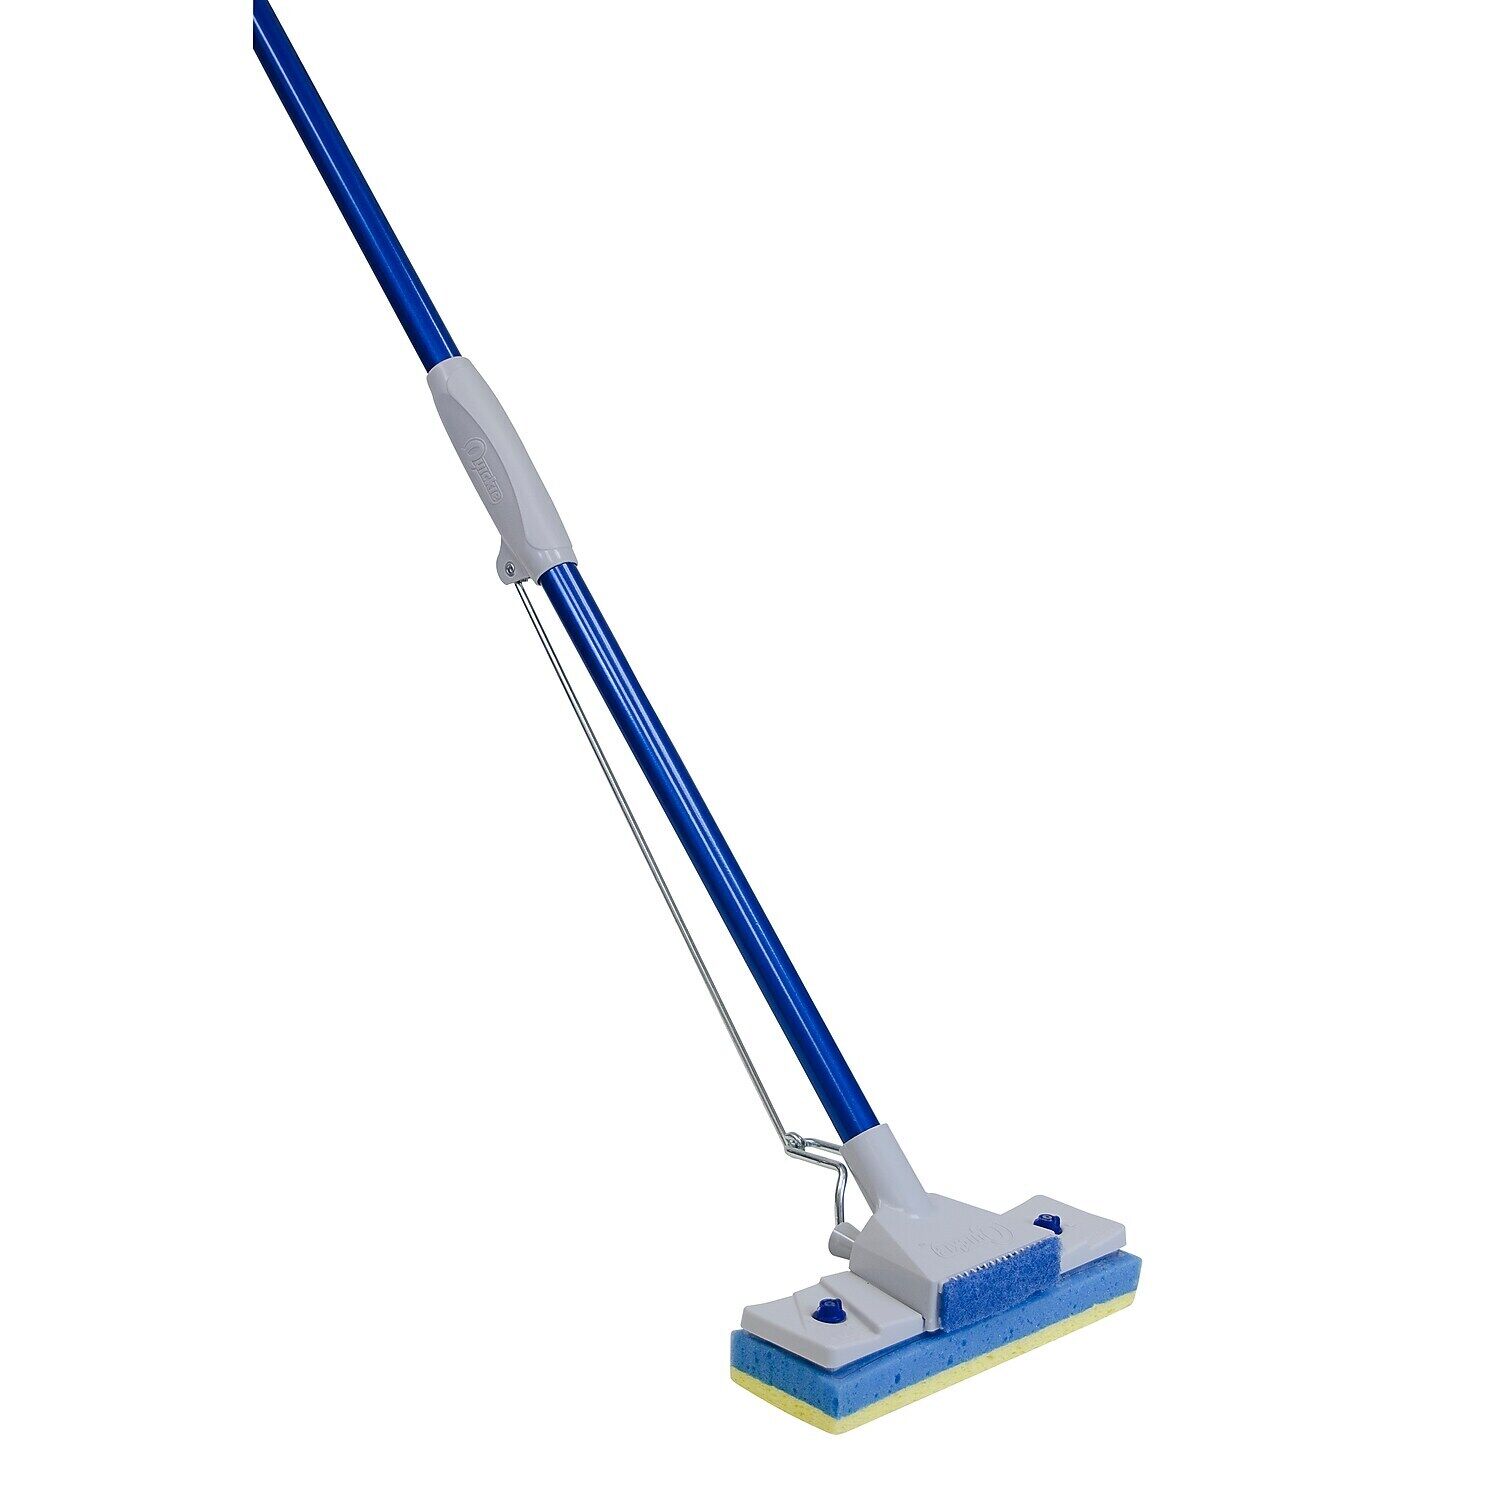 QUICKIE MANUFACTURING CORP Quickie Super Cell 48" Handle Sponge Mop (454) 833826